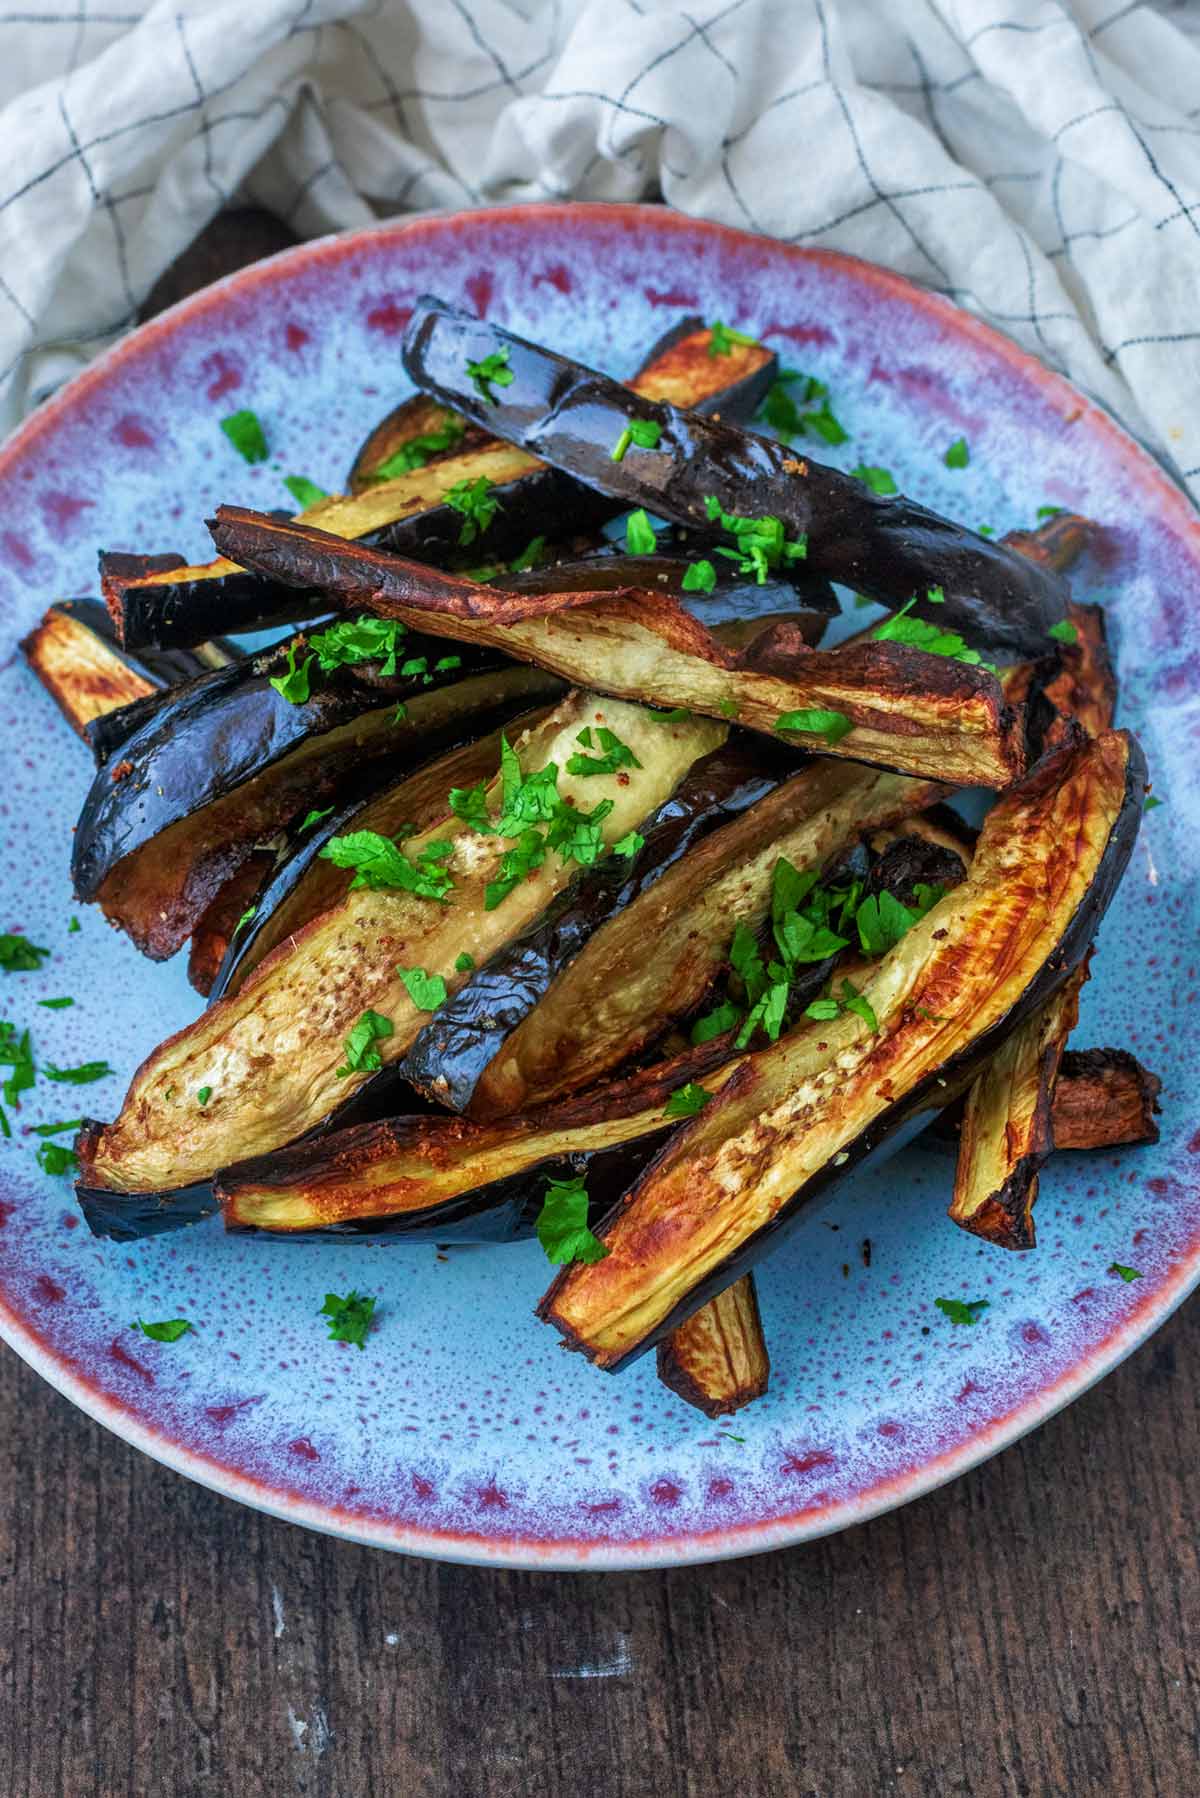 A plate of cooked aubergine in front of a checked towel.